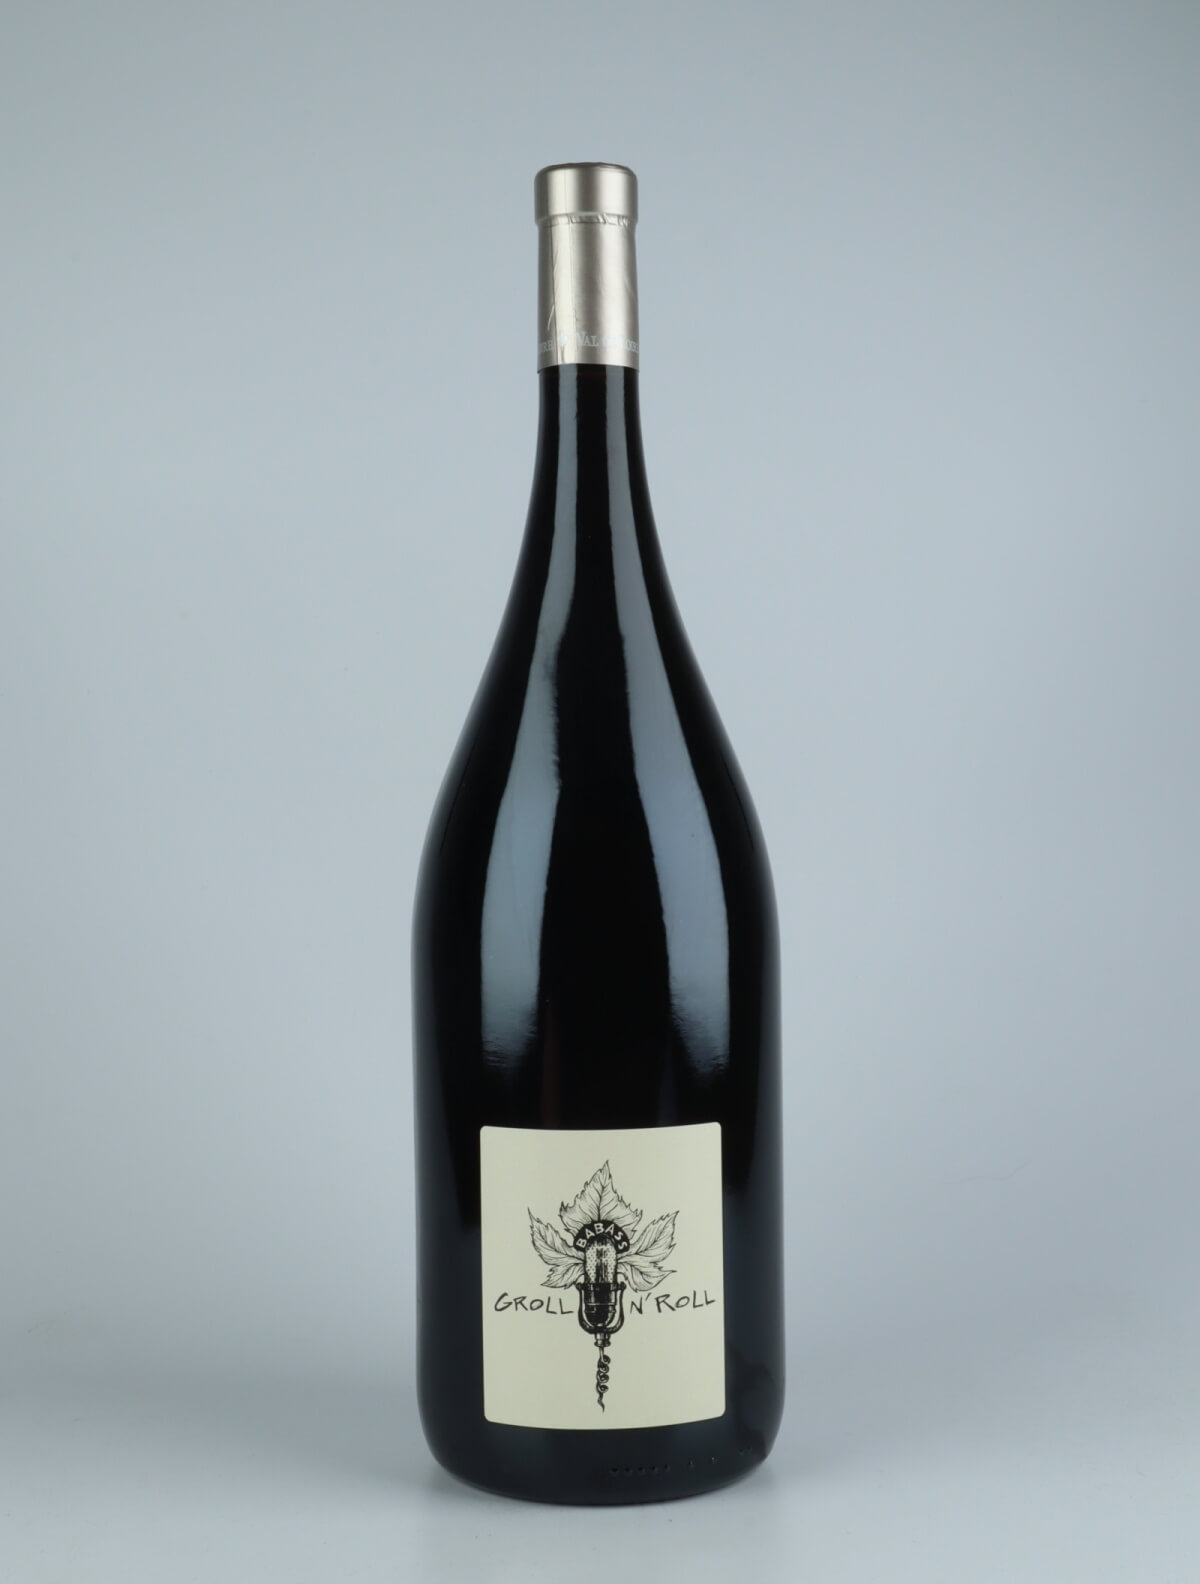 A bottle 2020 Groll 'n Roll Red wine from Les Vignes de Babass, Loire in France